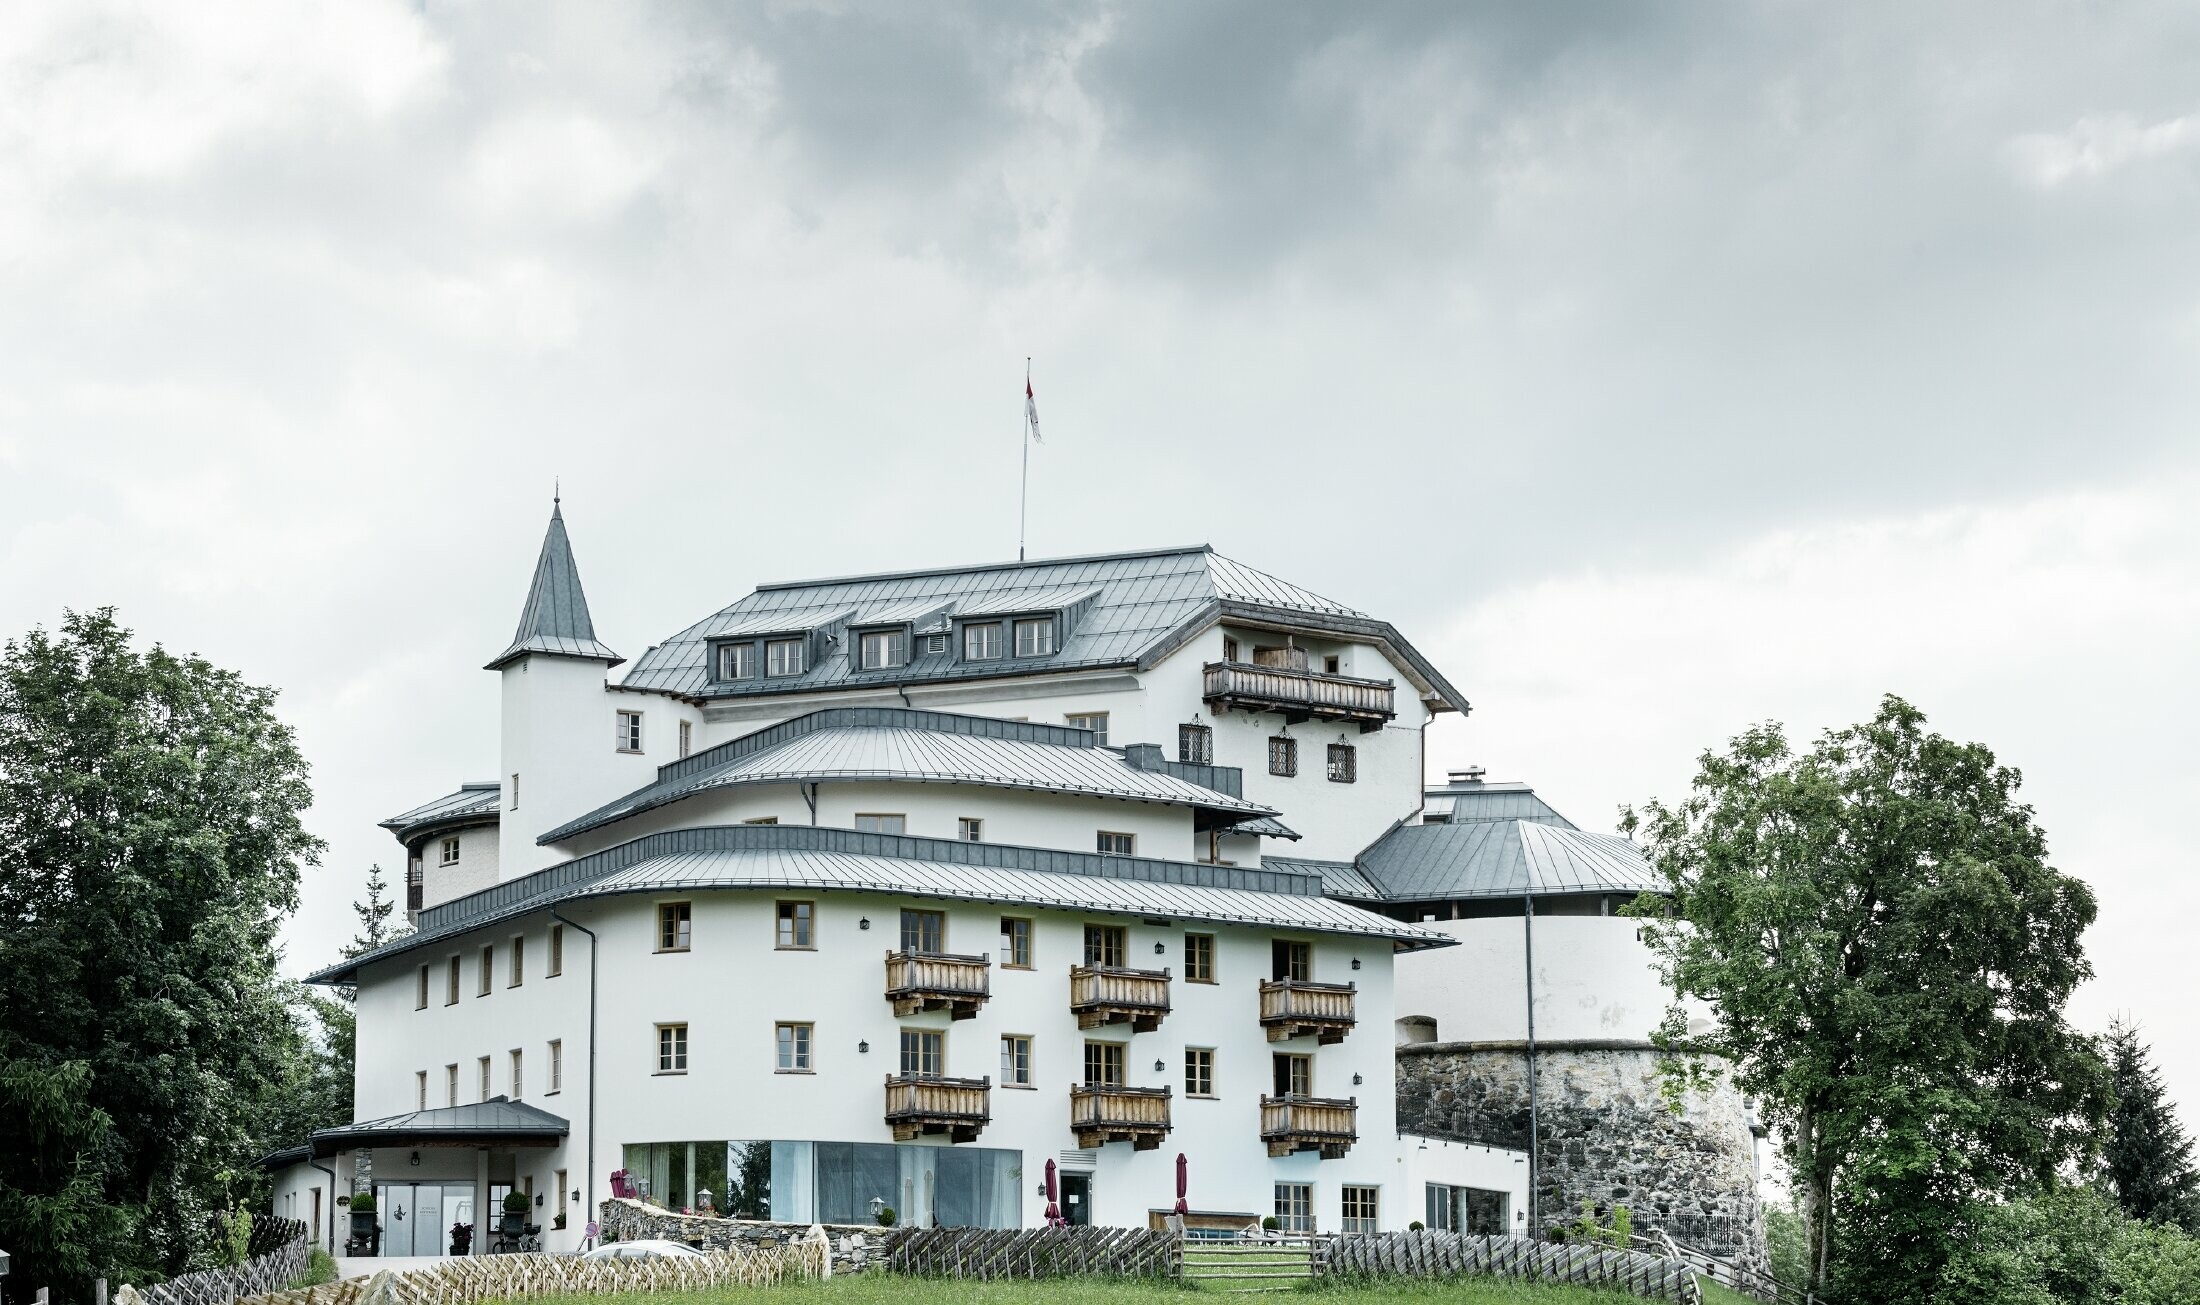 Mittersill Castle surrounded by trees and mountains with a renovated Prefalz roof in stone grey